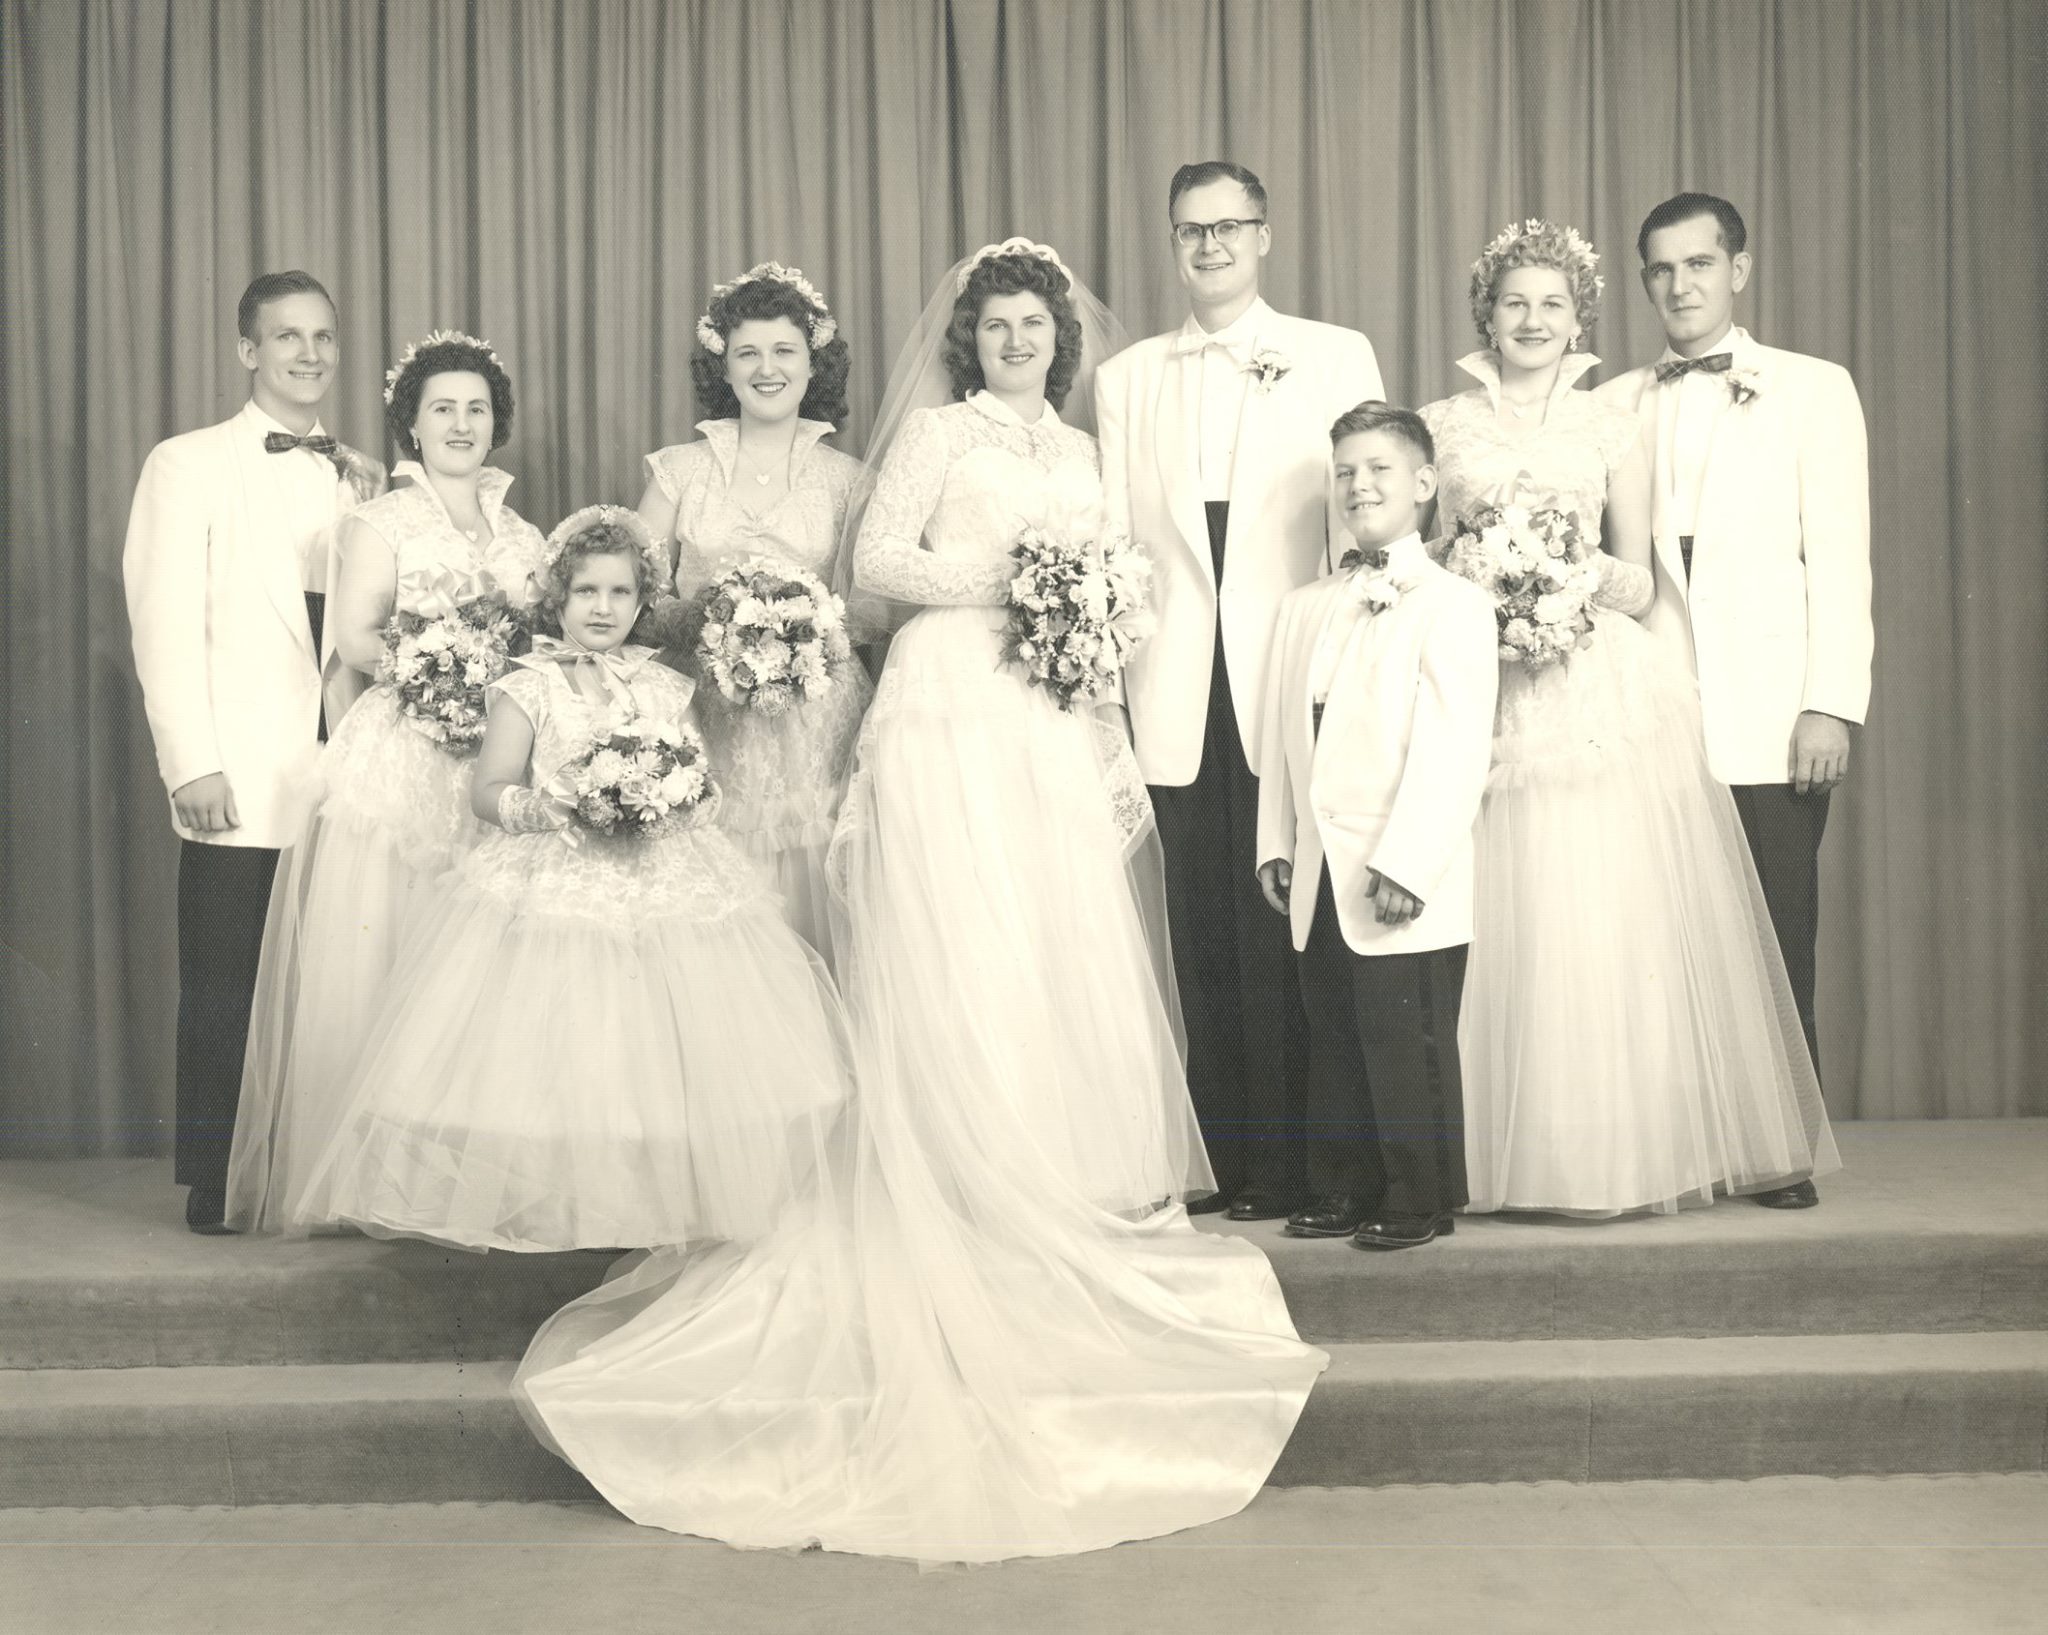 Black and white photograph of a wedding party. The bride's dress has a long train. The three bridesmaids and flower girl are wearing dresses with full gauzy skirts and standing collars.